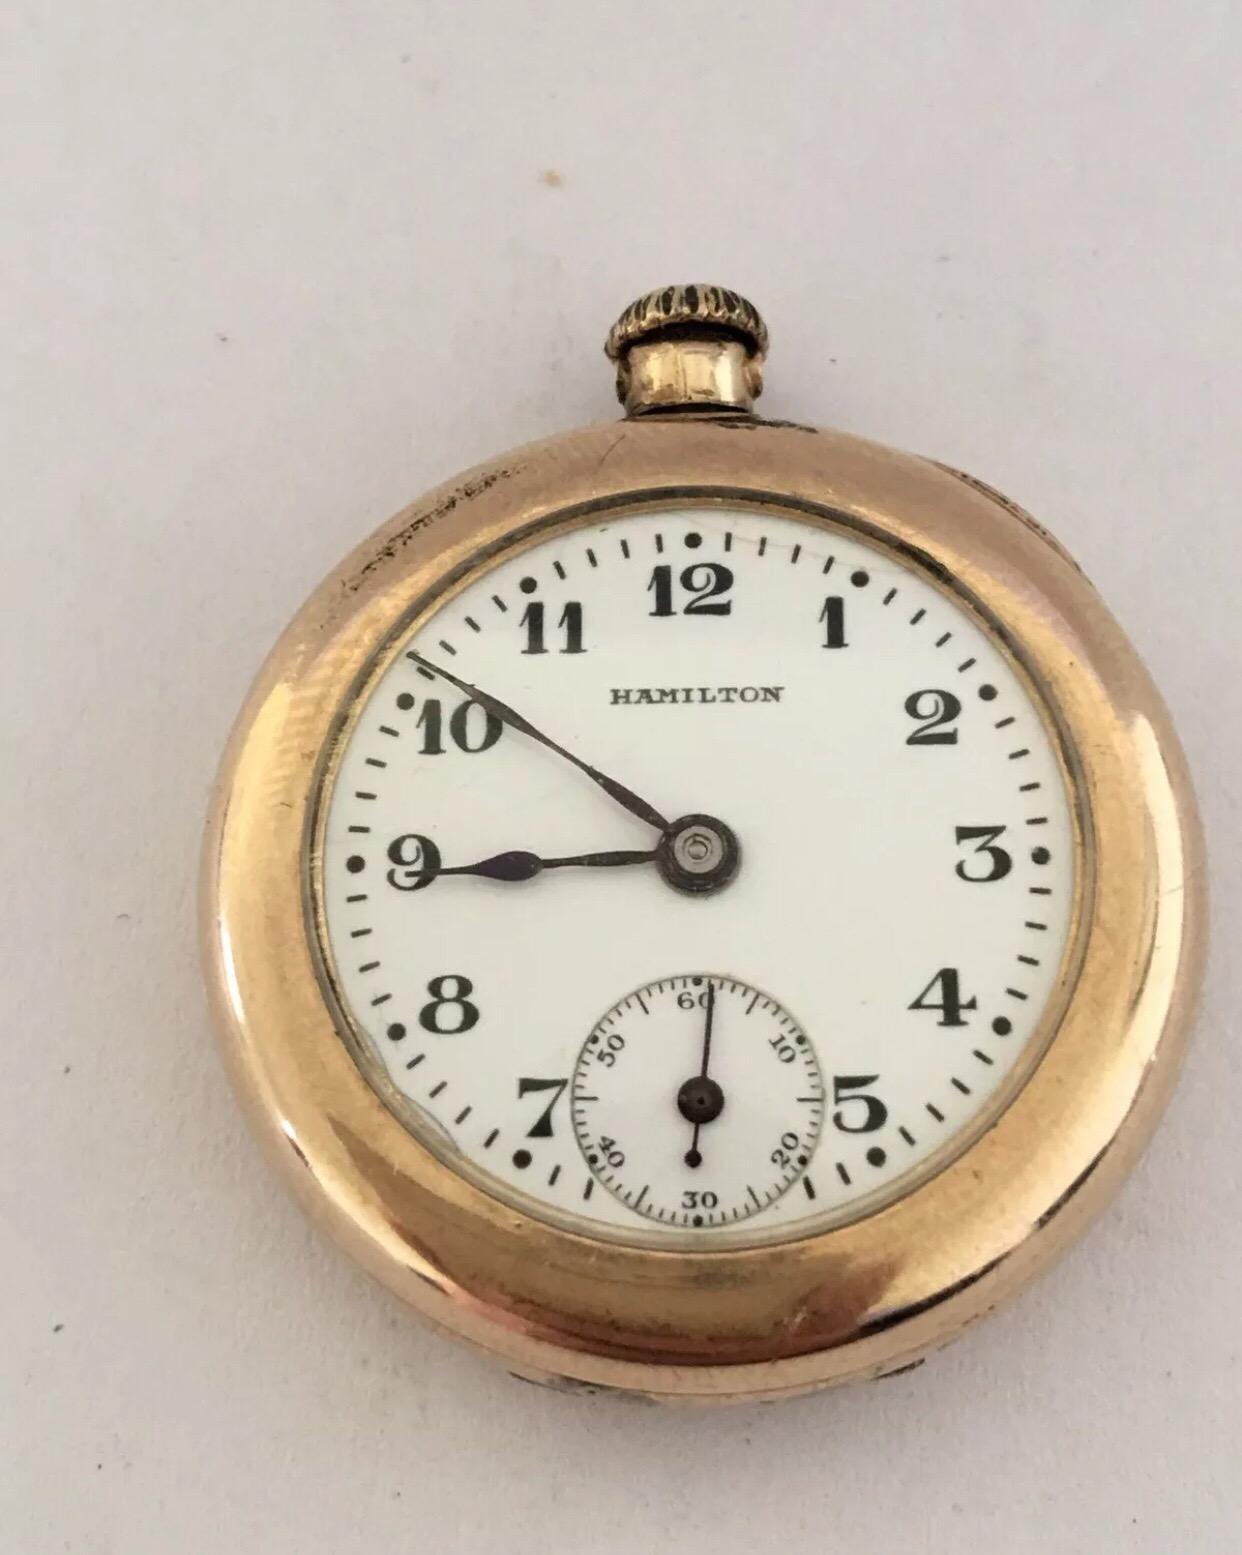 Women's or Men's Small Antique Gold-Plated Hamilton Pocket / Fob Watch